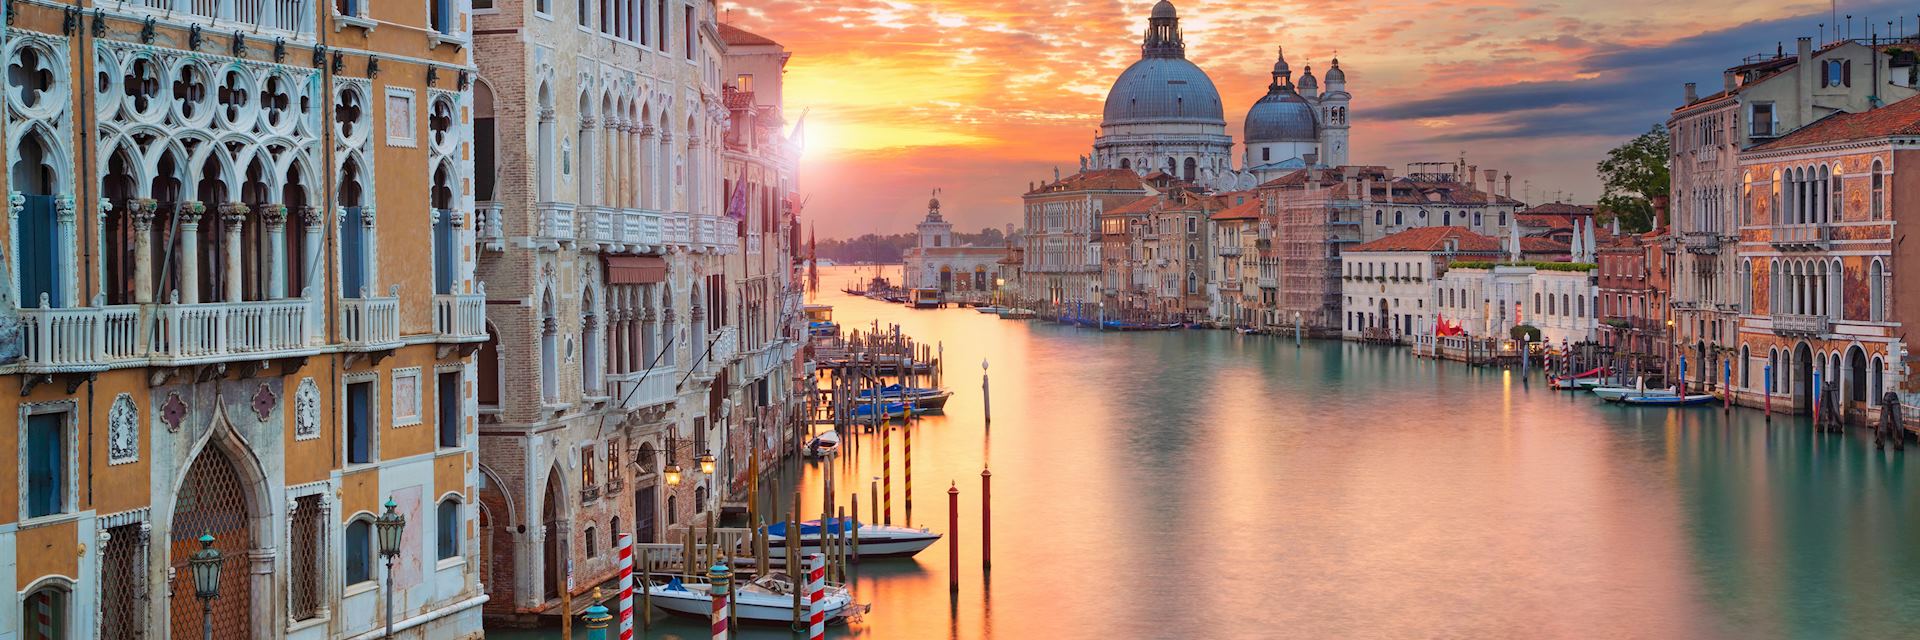 Grand Canal at sunset, Venice